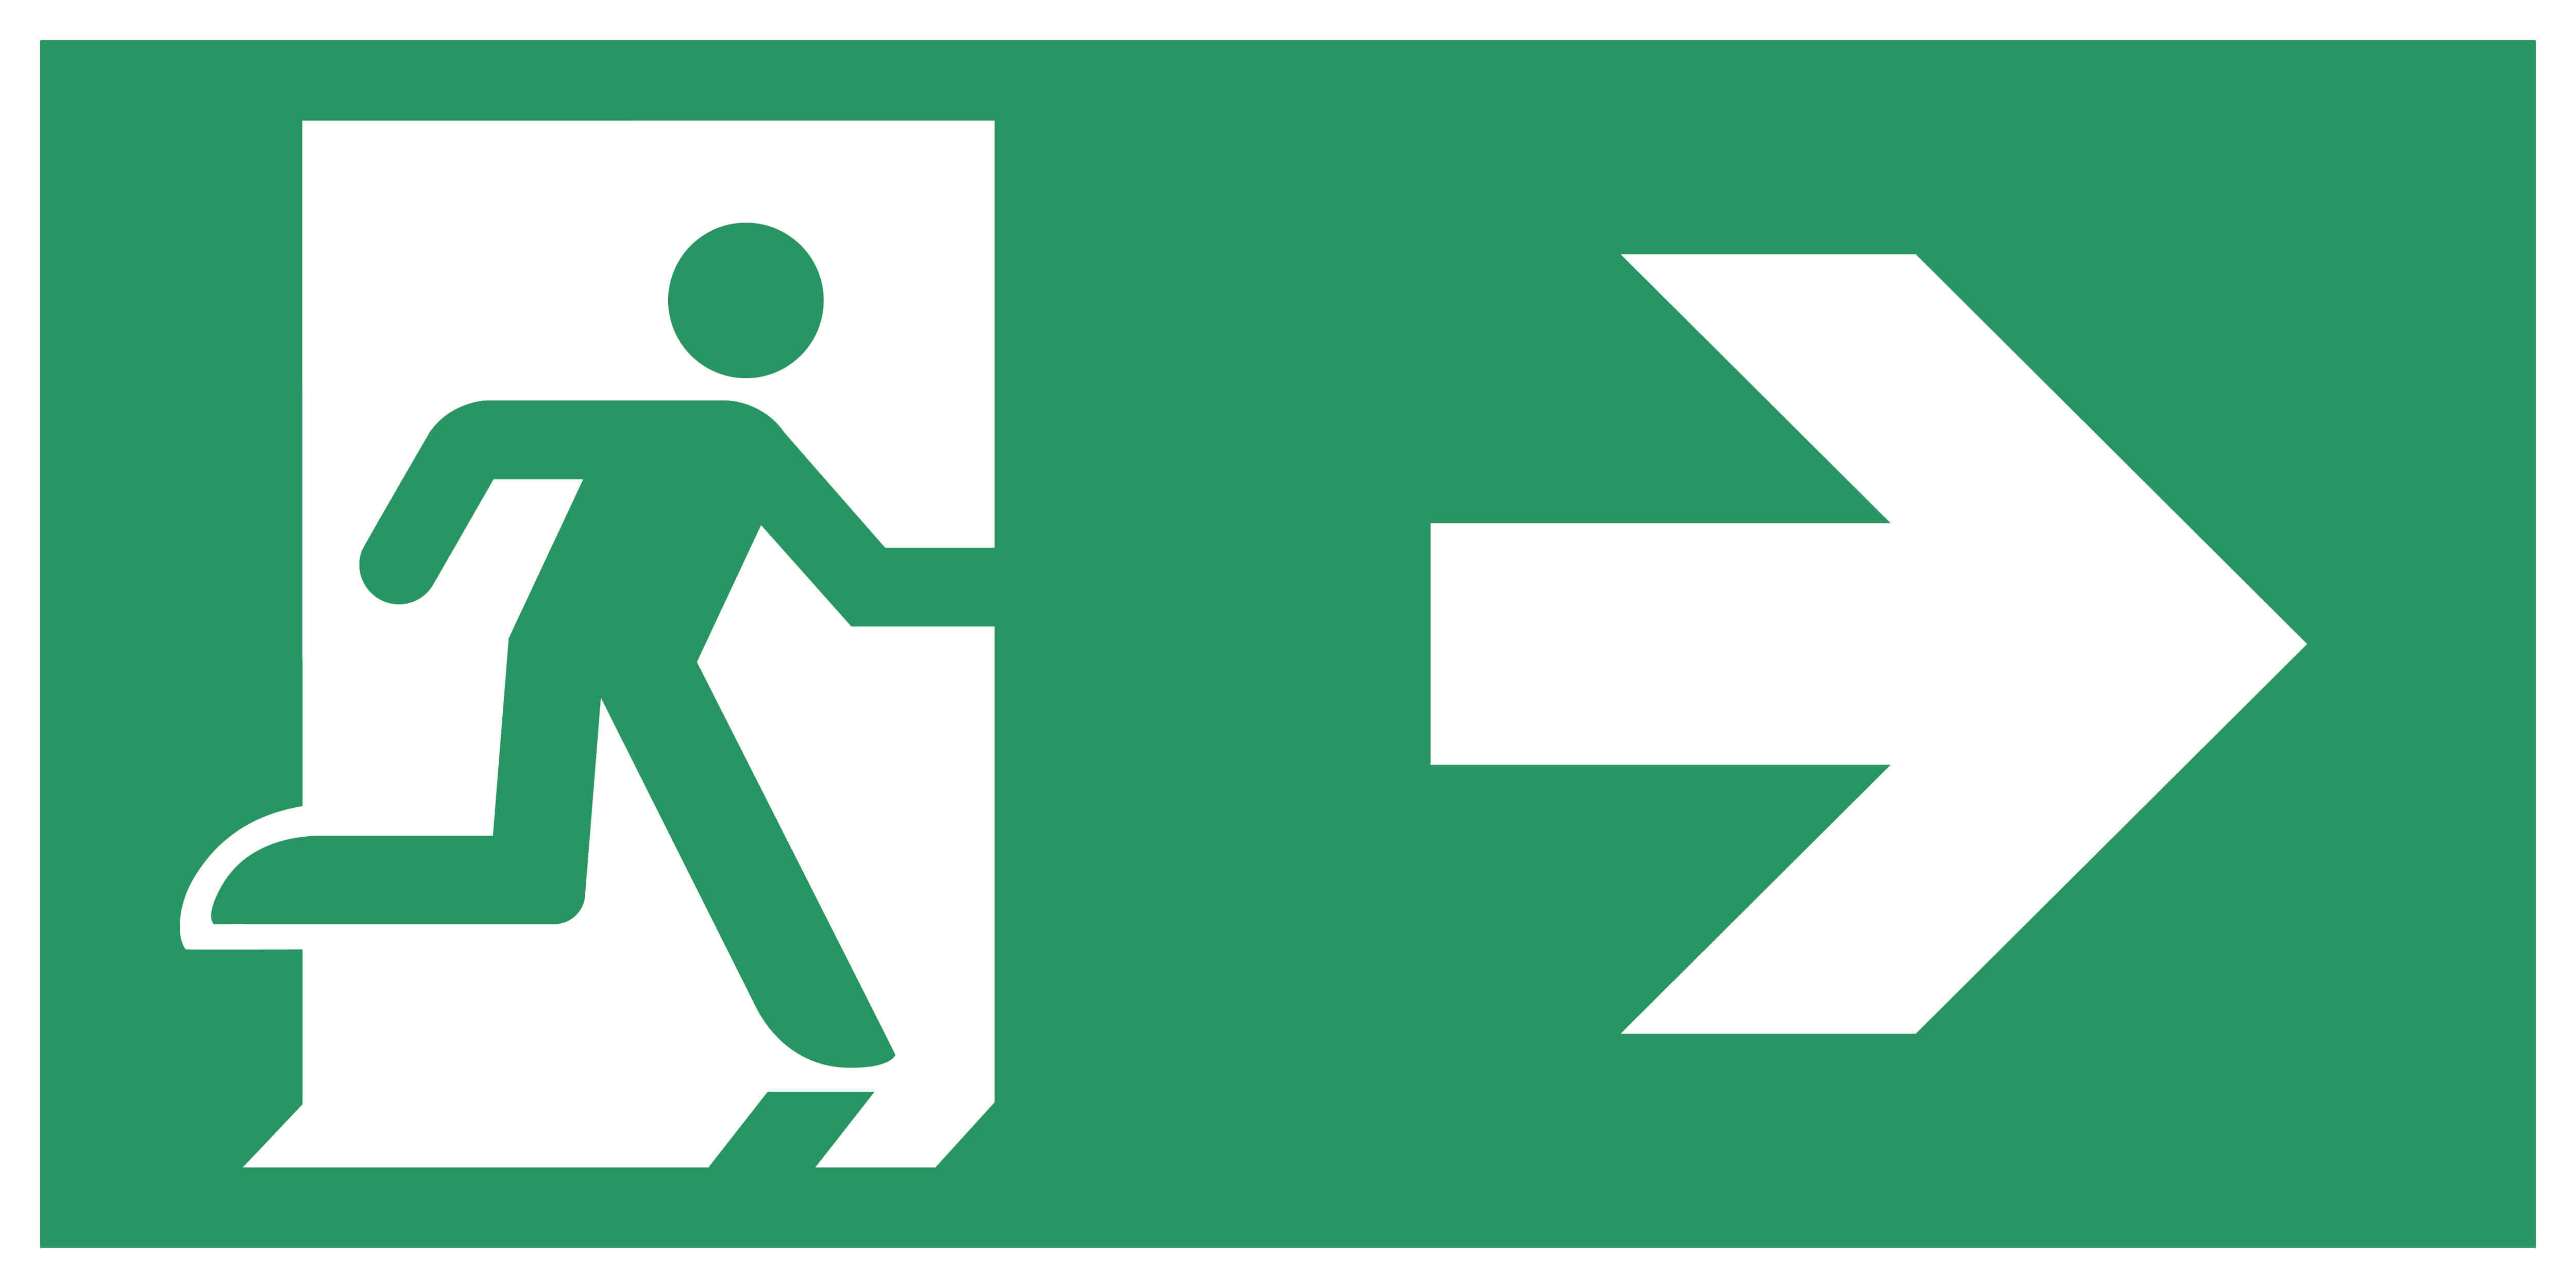 Make sure to have an evacuation route for your building in case of disaster.